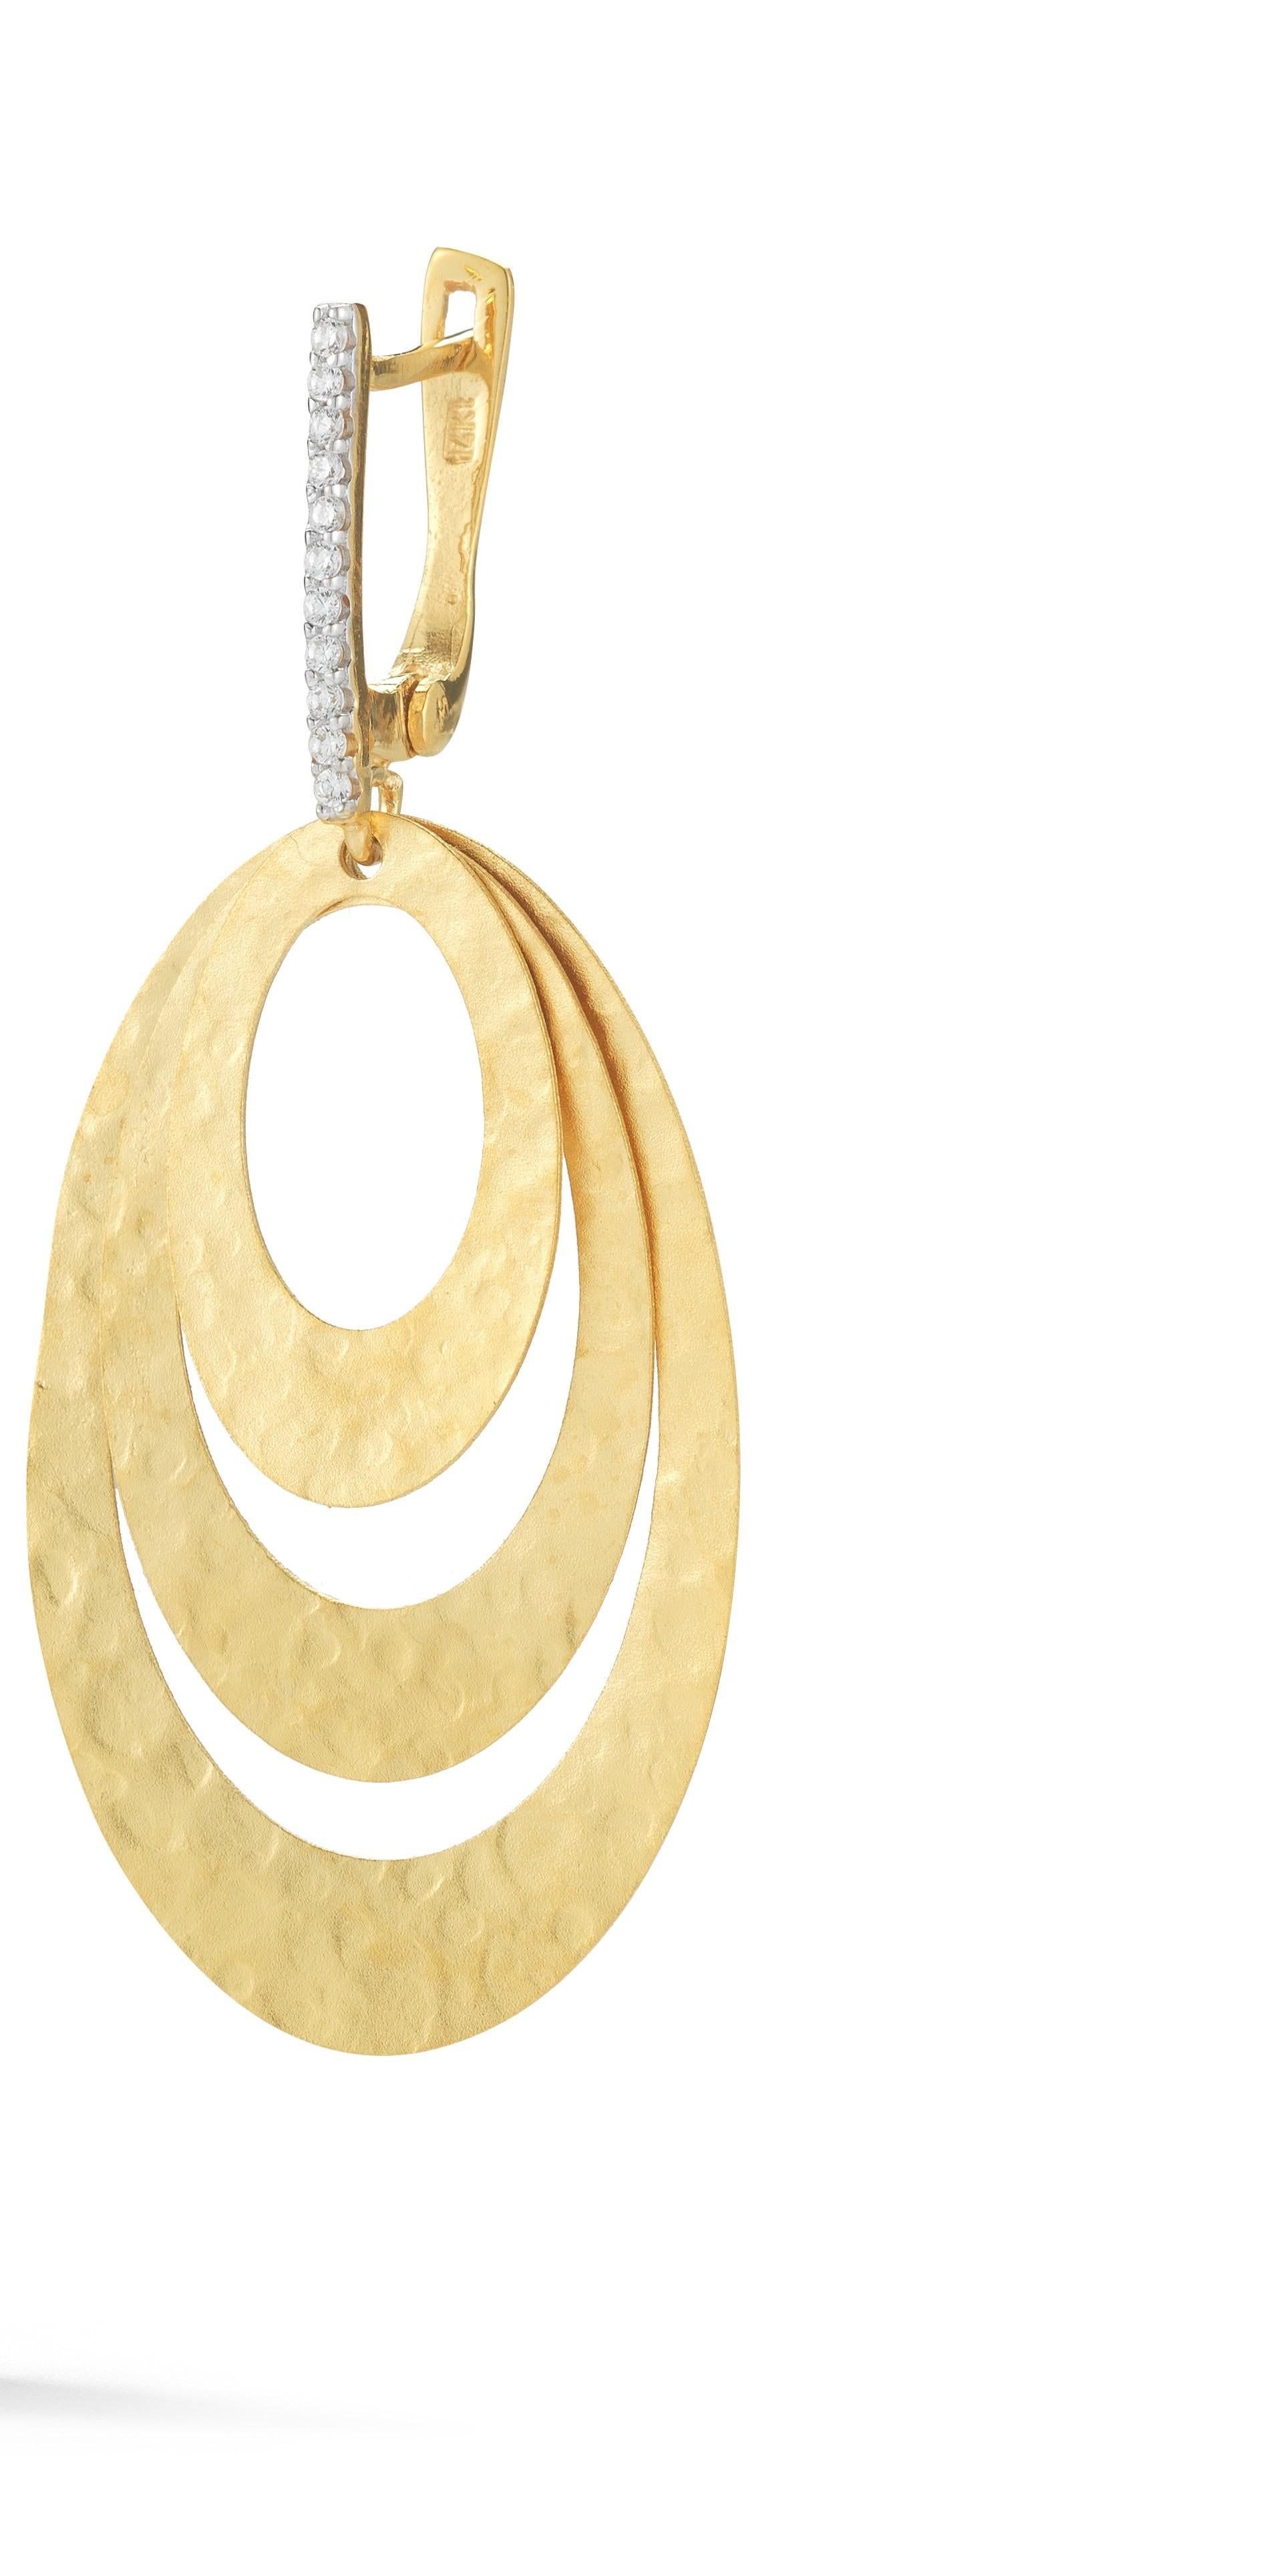 14 Karat Yellow Gold Hand-Crafted Matte and Hammer-Finished Concentric Oval-Shaped Earrings, Accented with 0.13 Carats of Pave Set Diamond Lever Back Bales.
